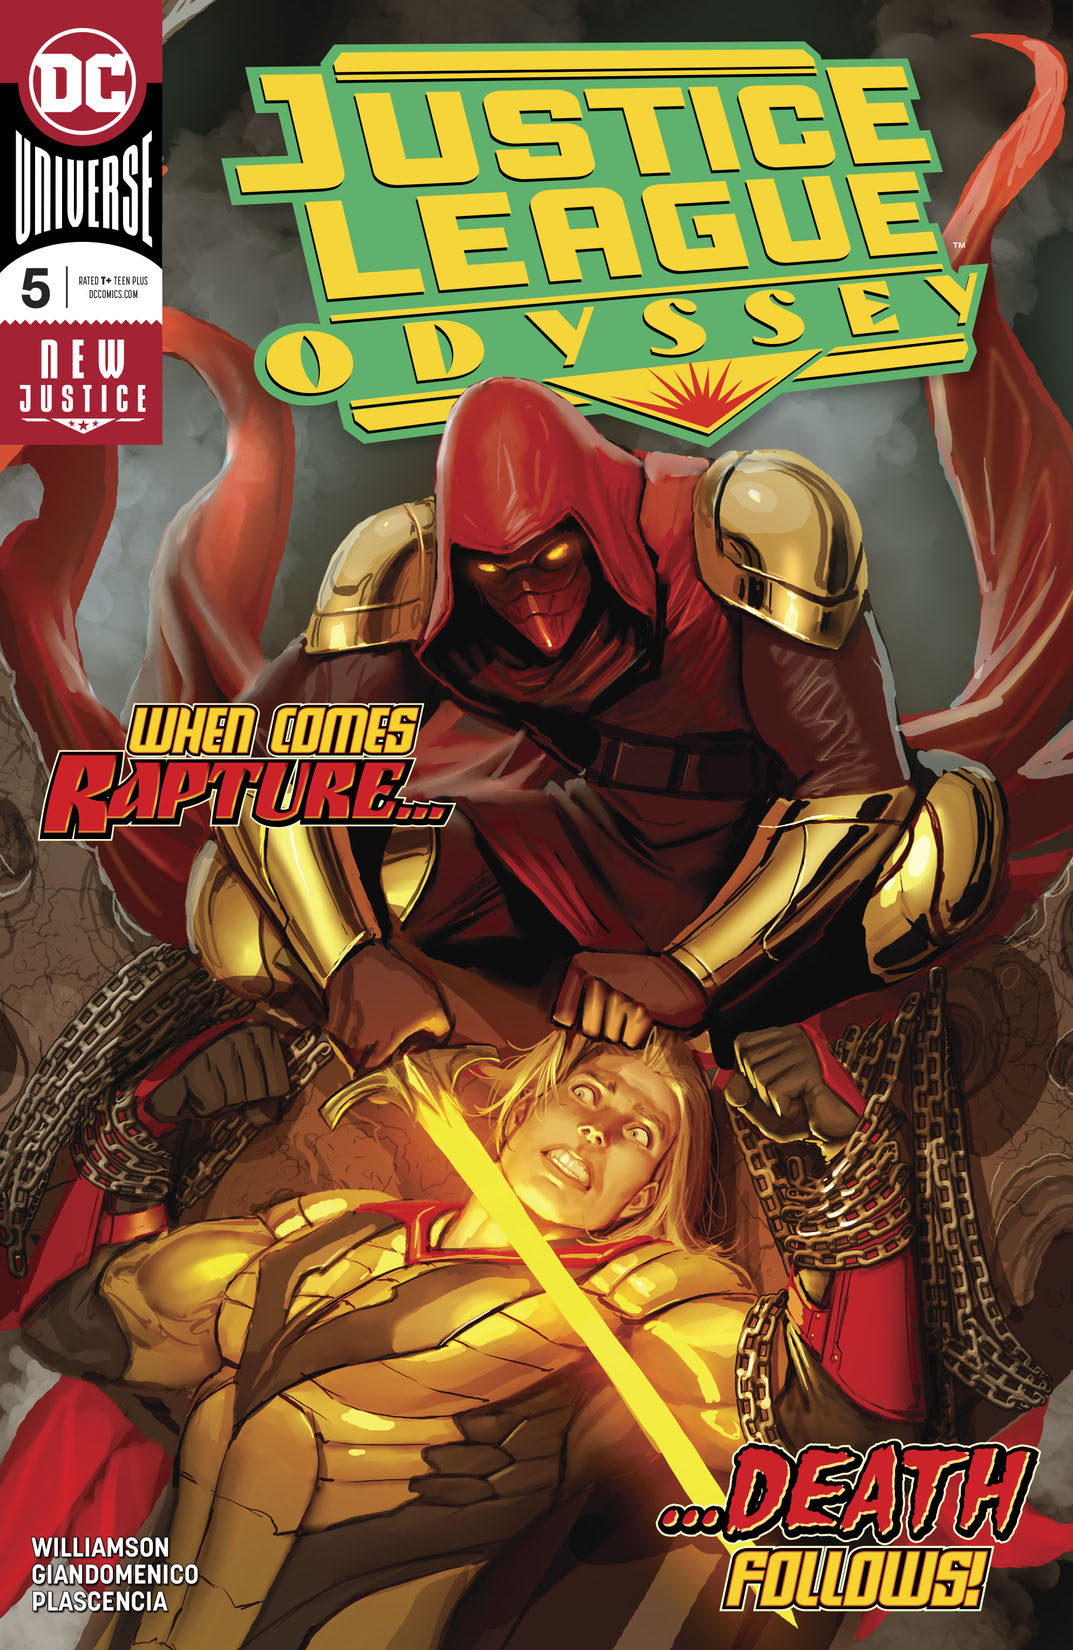 Justice League Odyssey #5 preview images